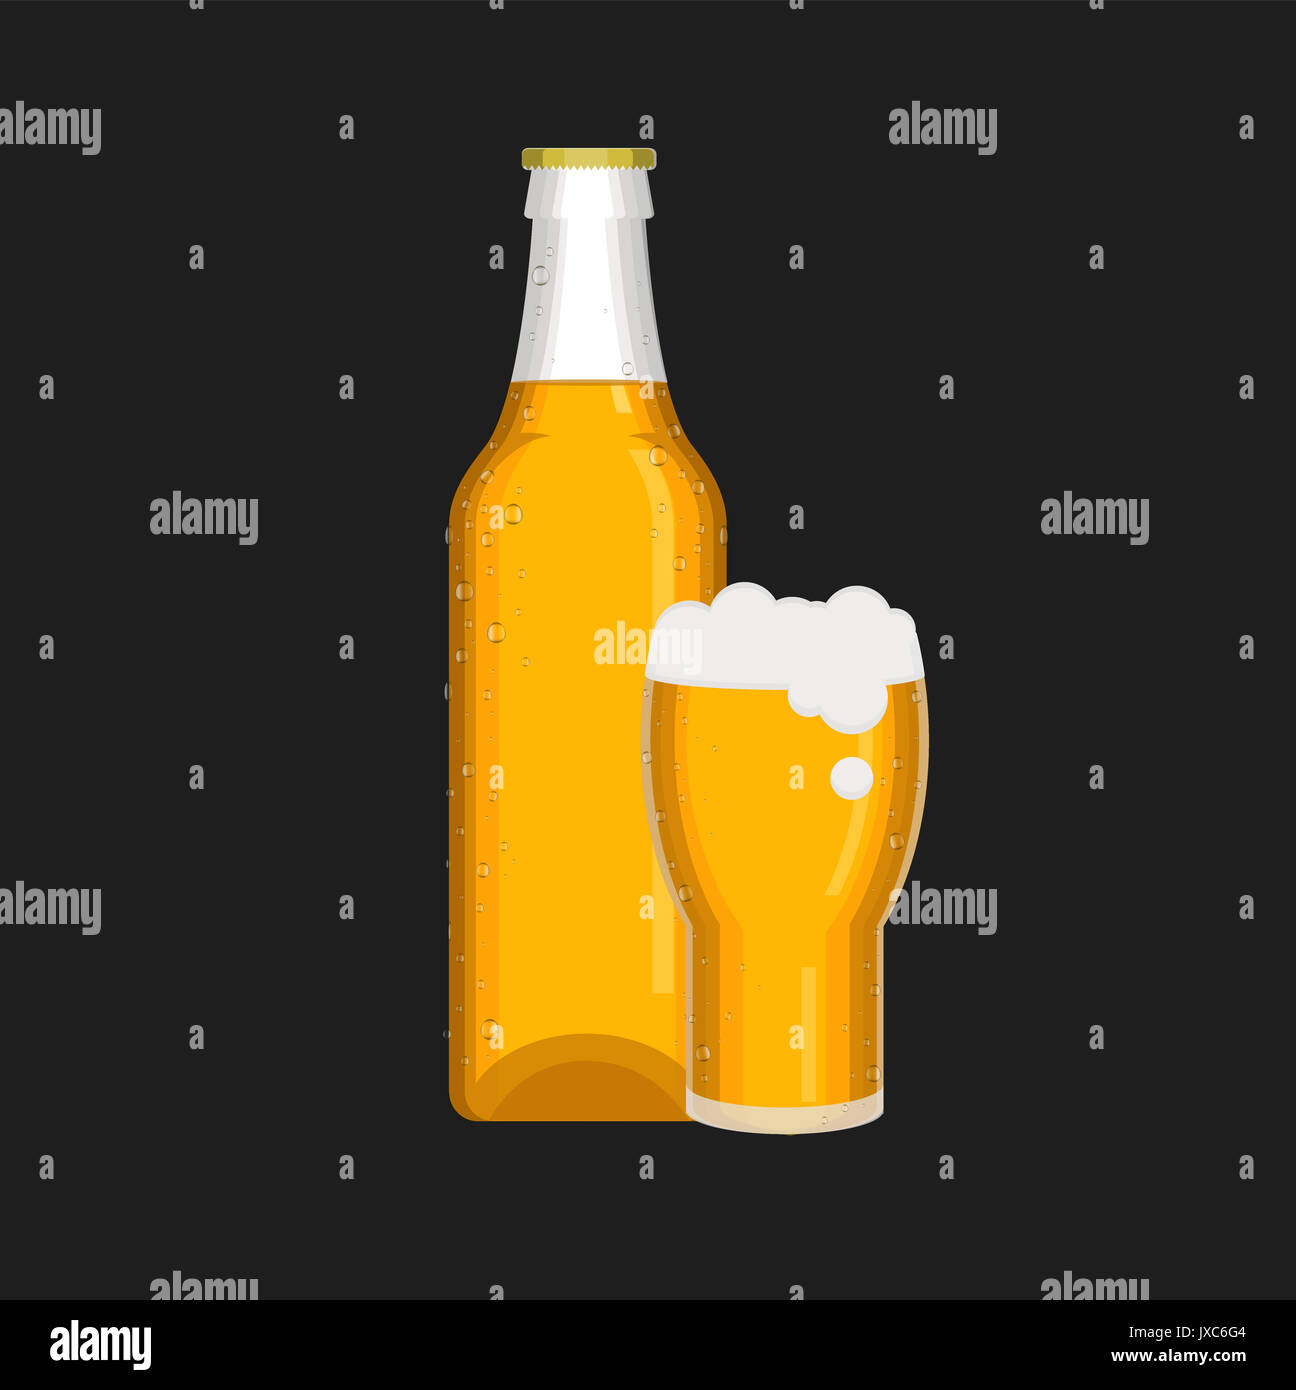 bottle and glass vector graphic or illustrations Stock Photo